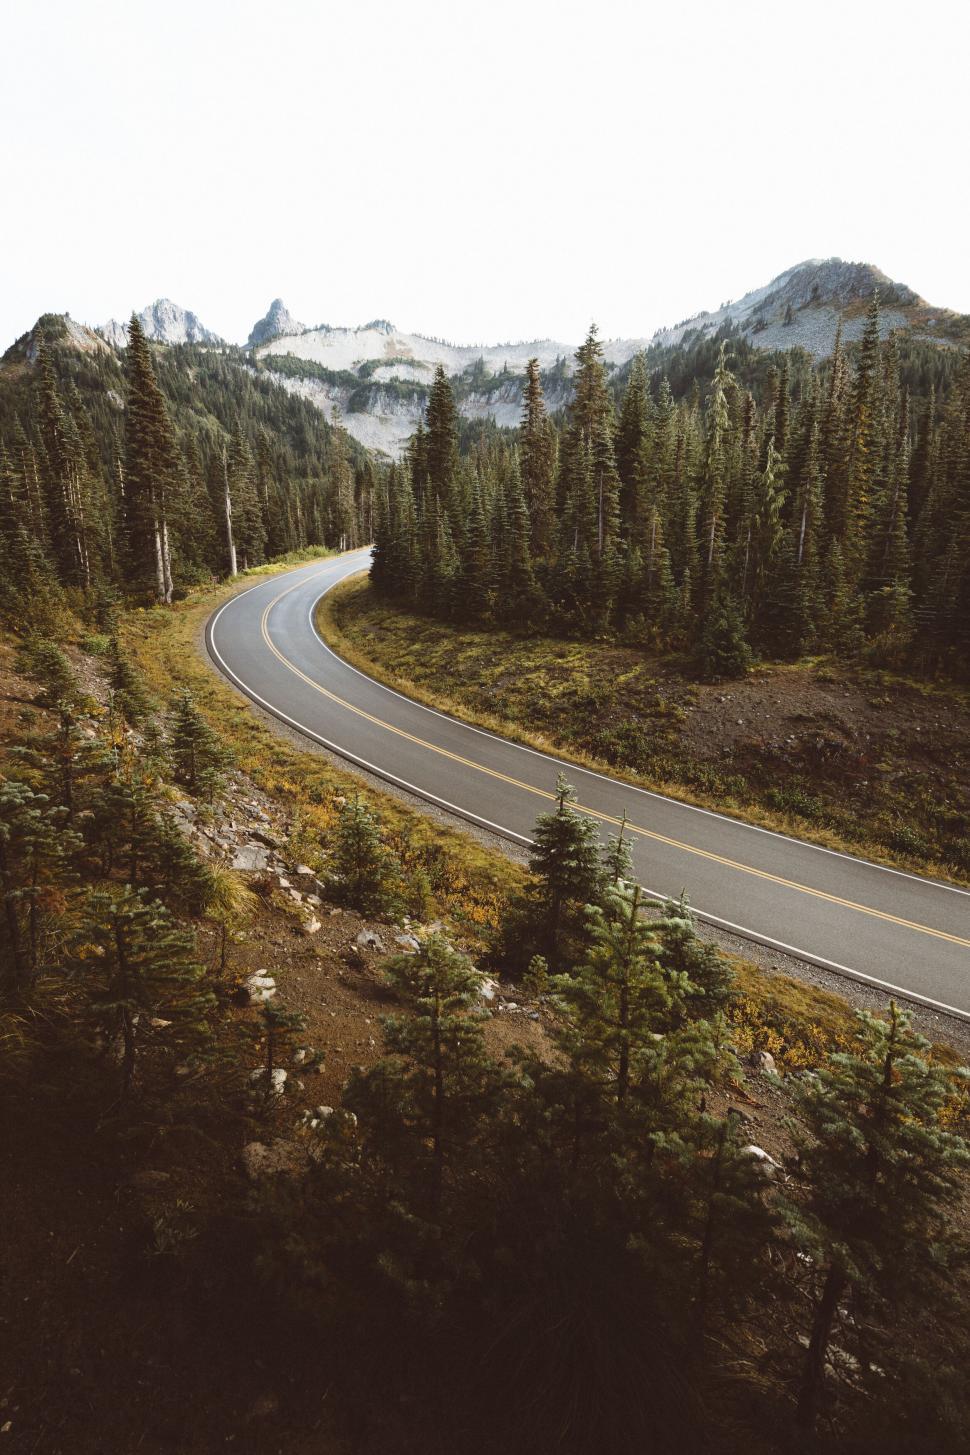 Free Image of Mountain road through evergreen forest 